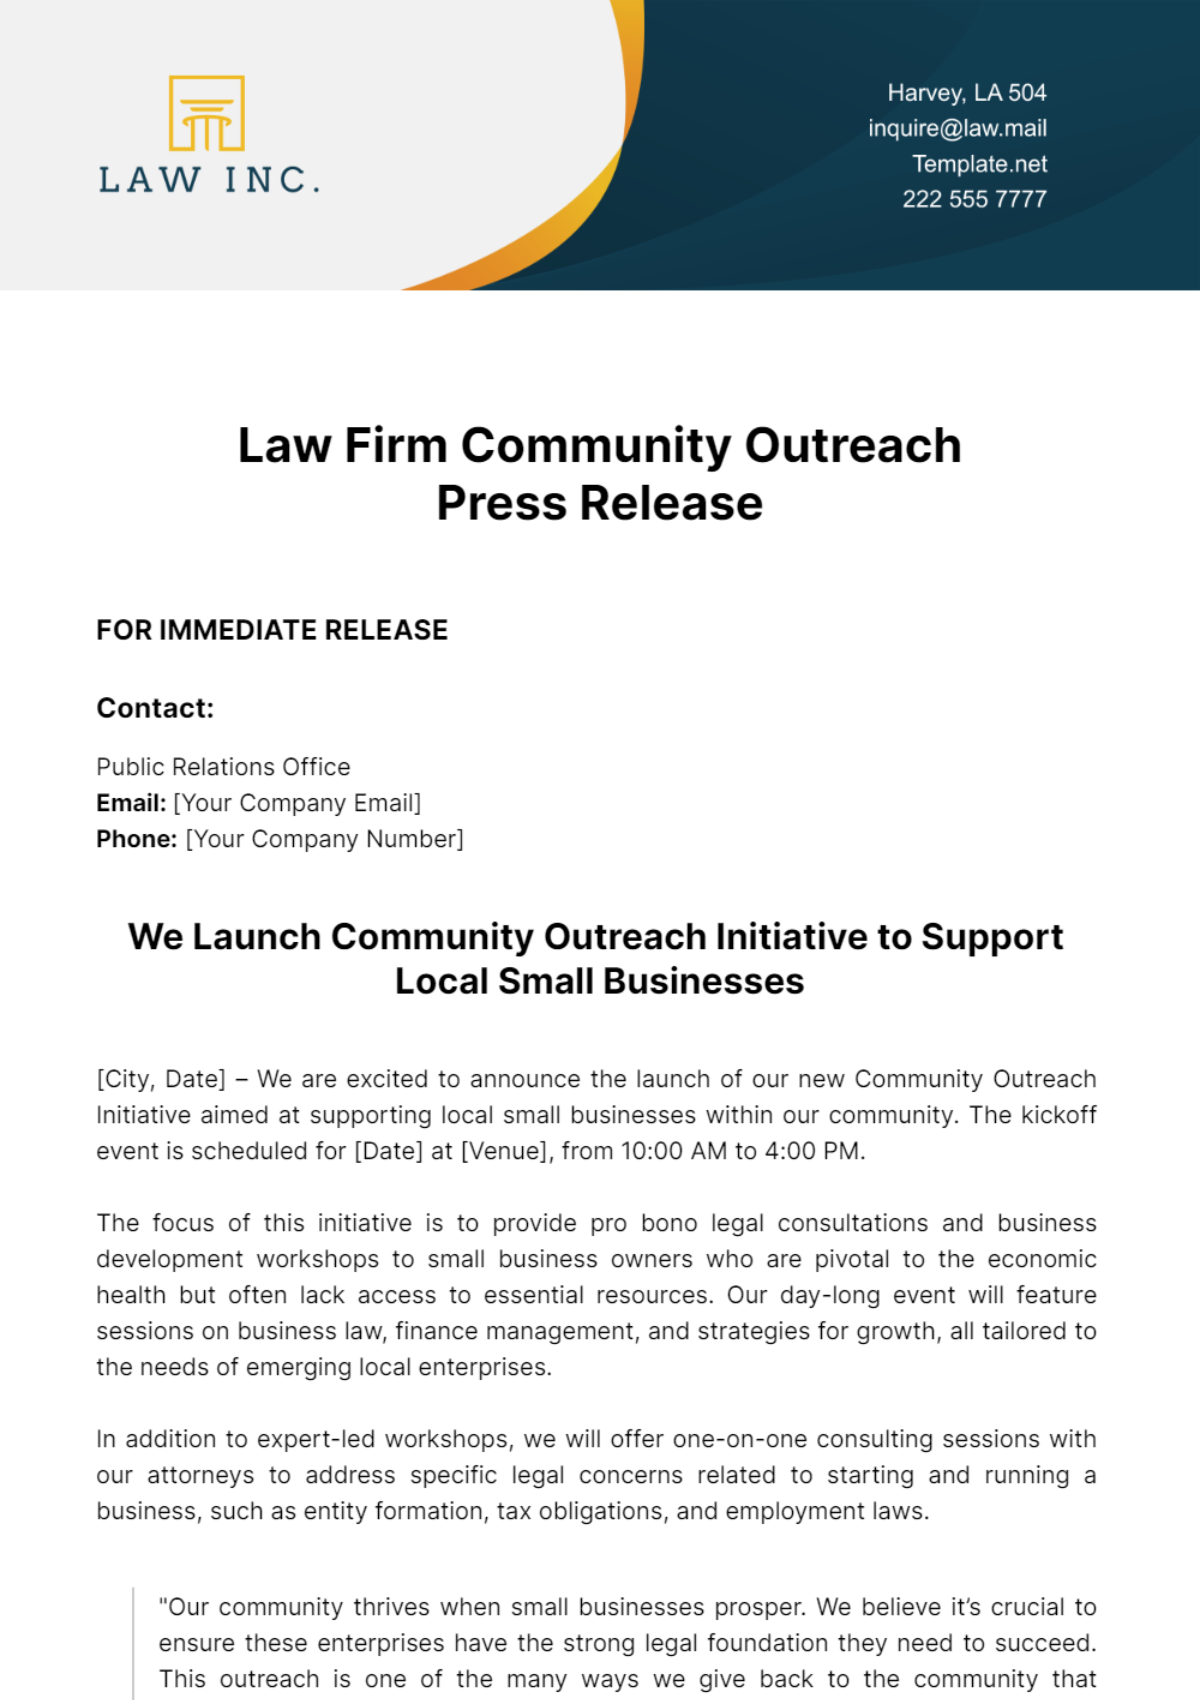 Free Law Firm Community Outreach Press Release Template